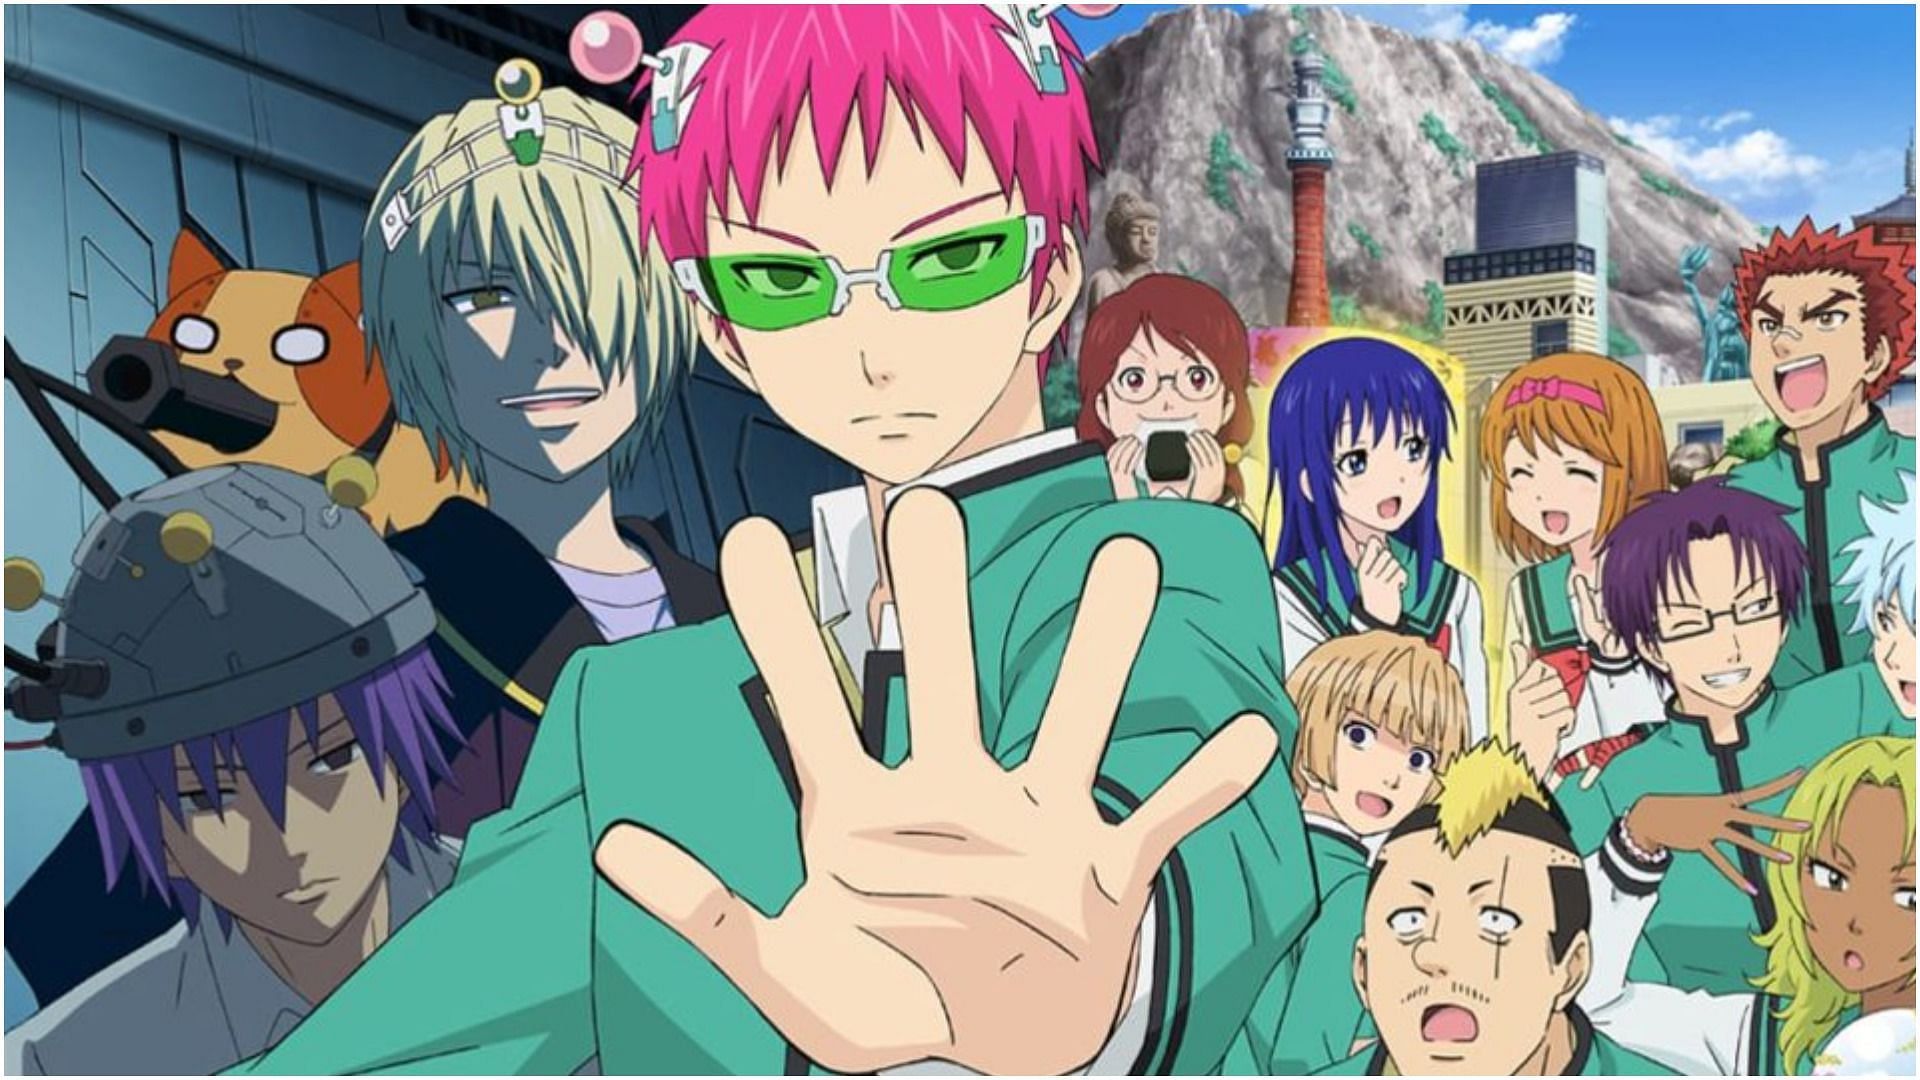 All key characters in The Disastrous Life of Saiki K. (Image via J.C Staff)